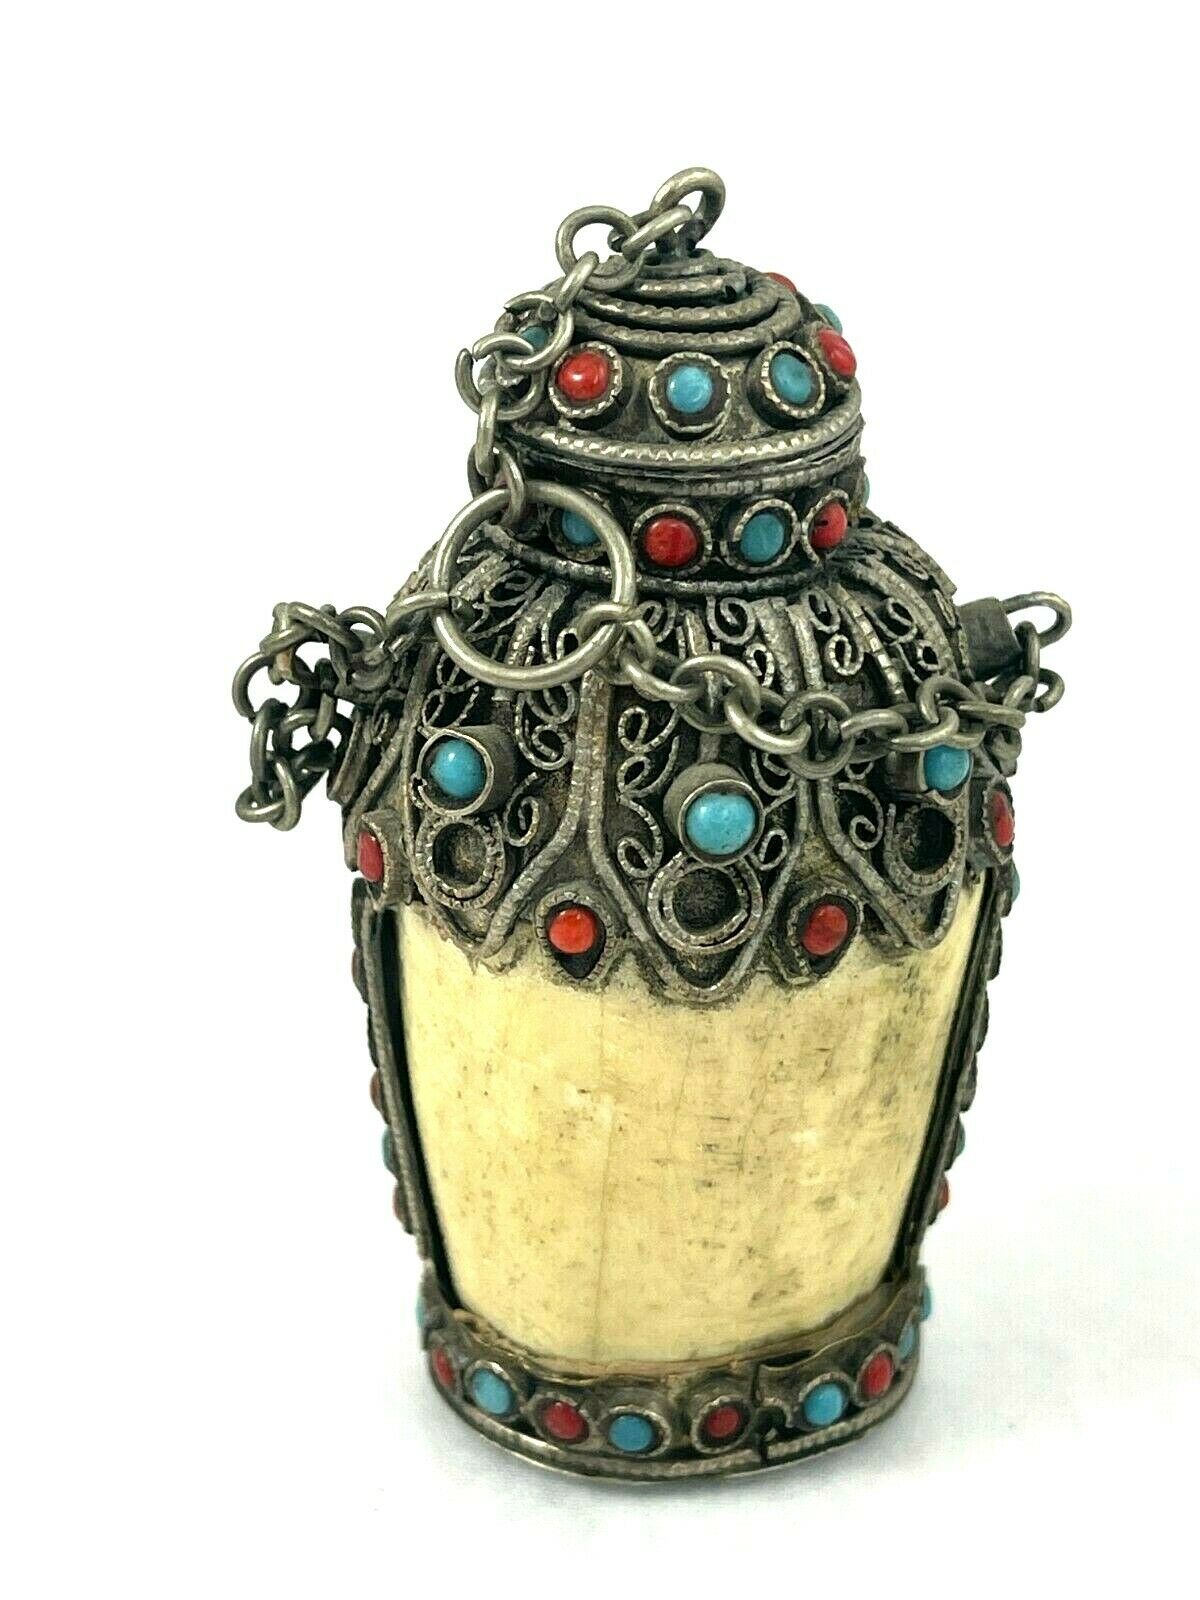 Metal And Stone Snuff Bottle With Spoon - Lots Of Deco And Stones